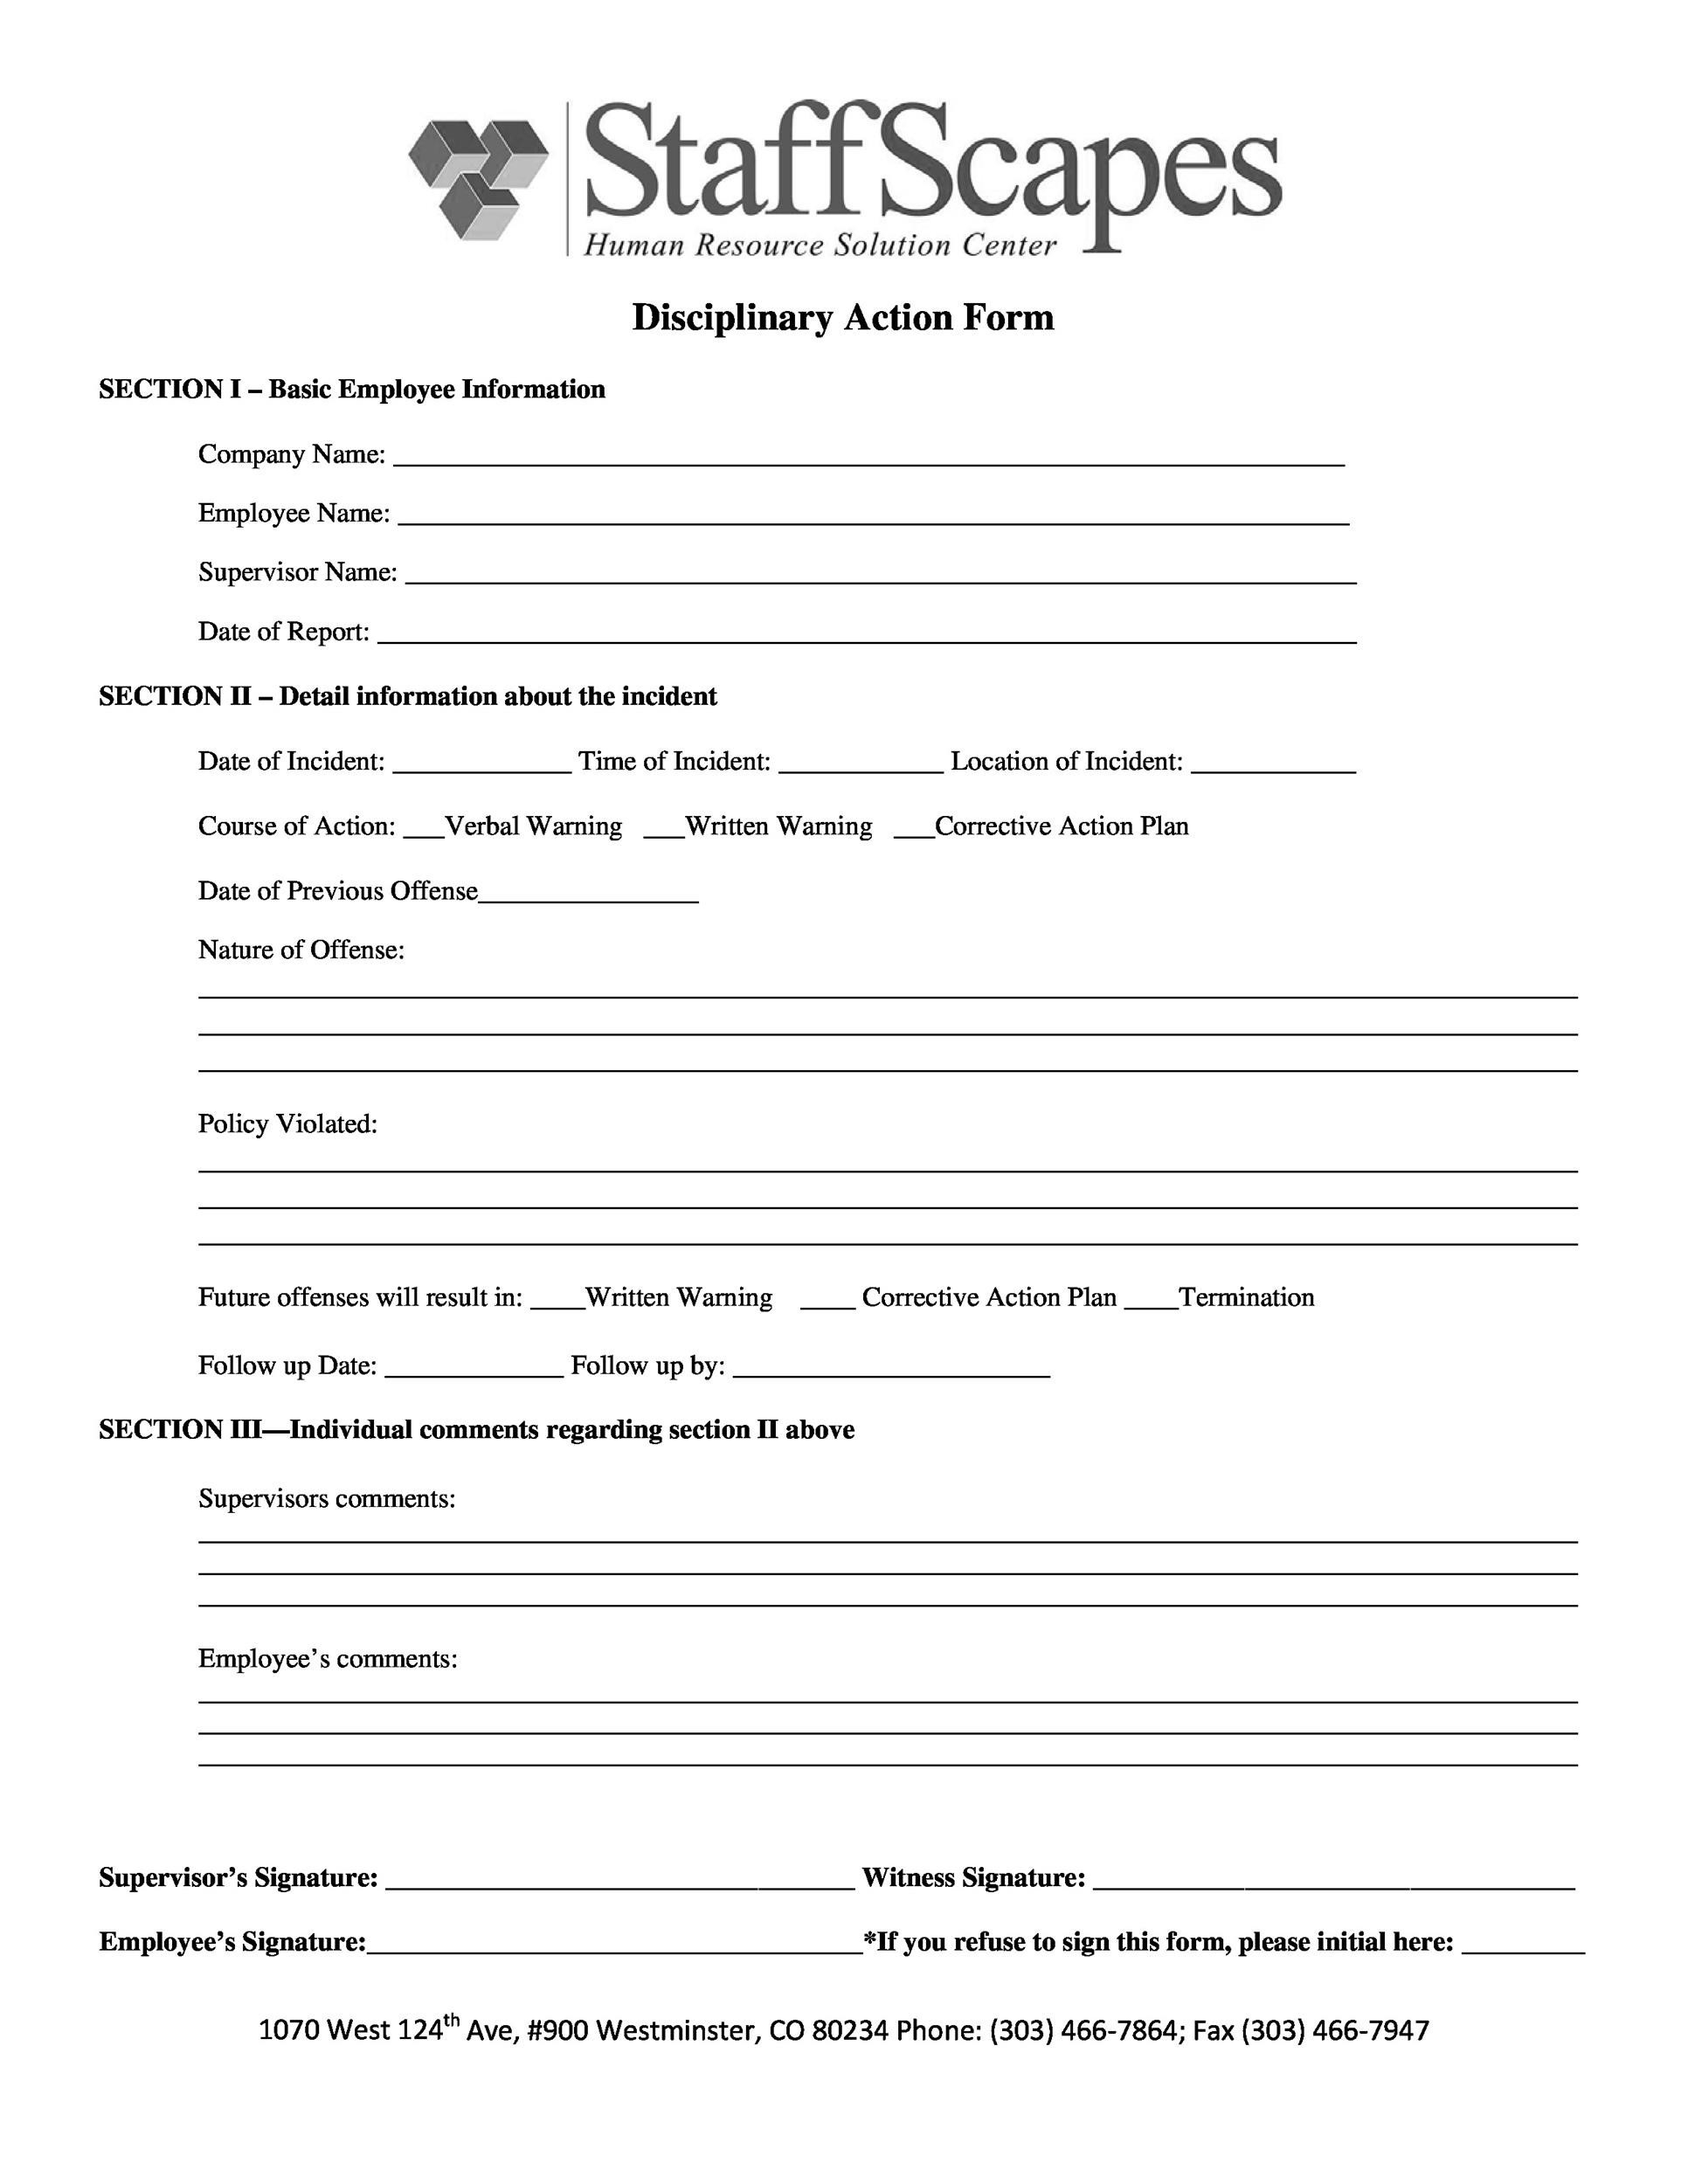 46 Effective Employee Write Up Forms Disciplinary